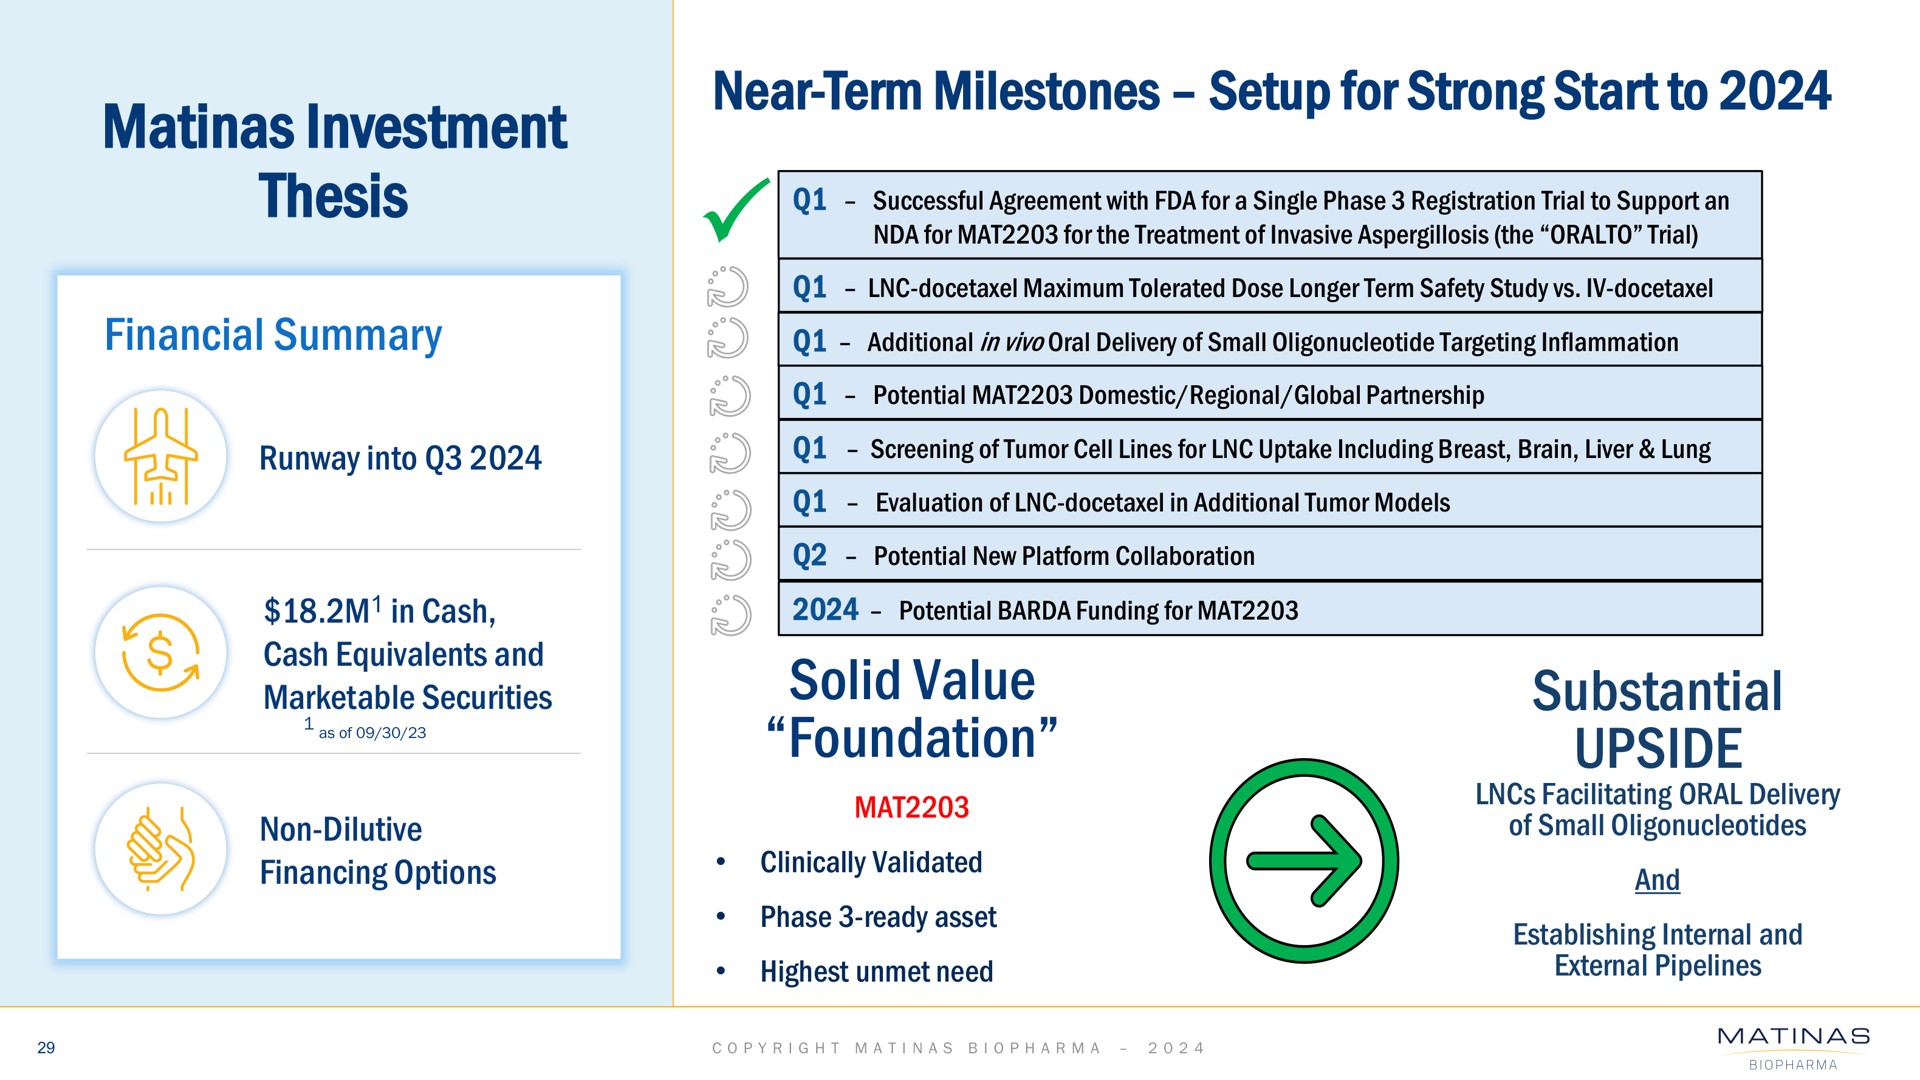 investment thesis financial summary near term milestones setup for strong start to solid value foundation substantial upside marketable secures sears | Matinas BioPharma